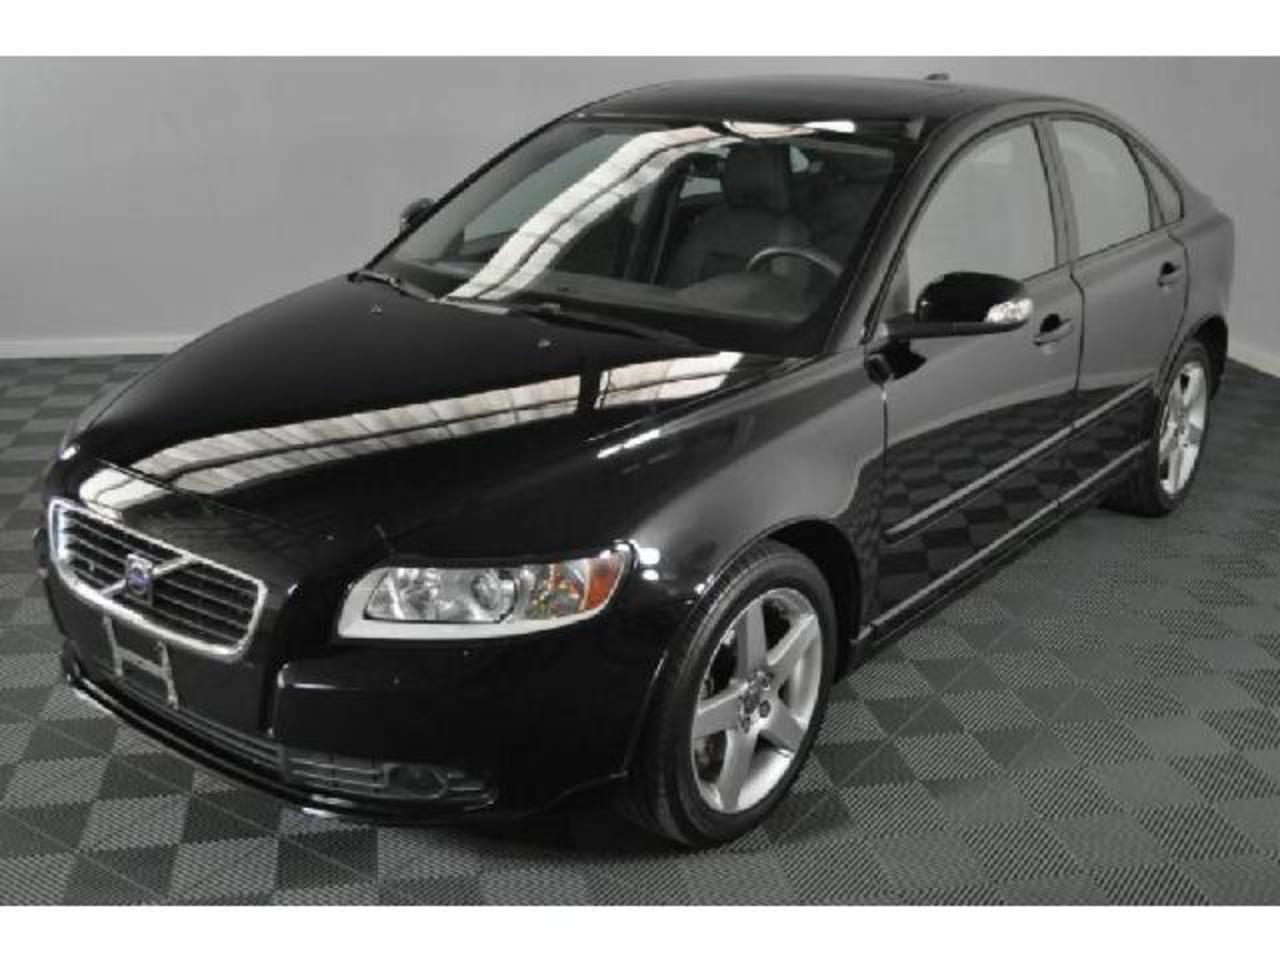 someone wants to sell VOLVO S40 24 L5 at $12,795 in New York City,